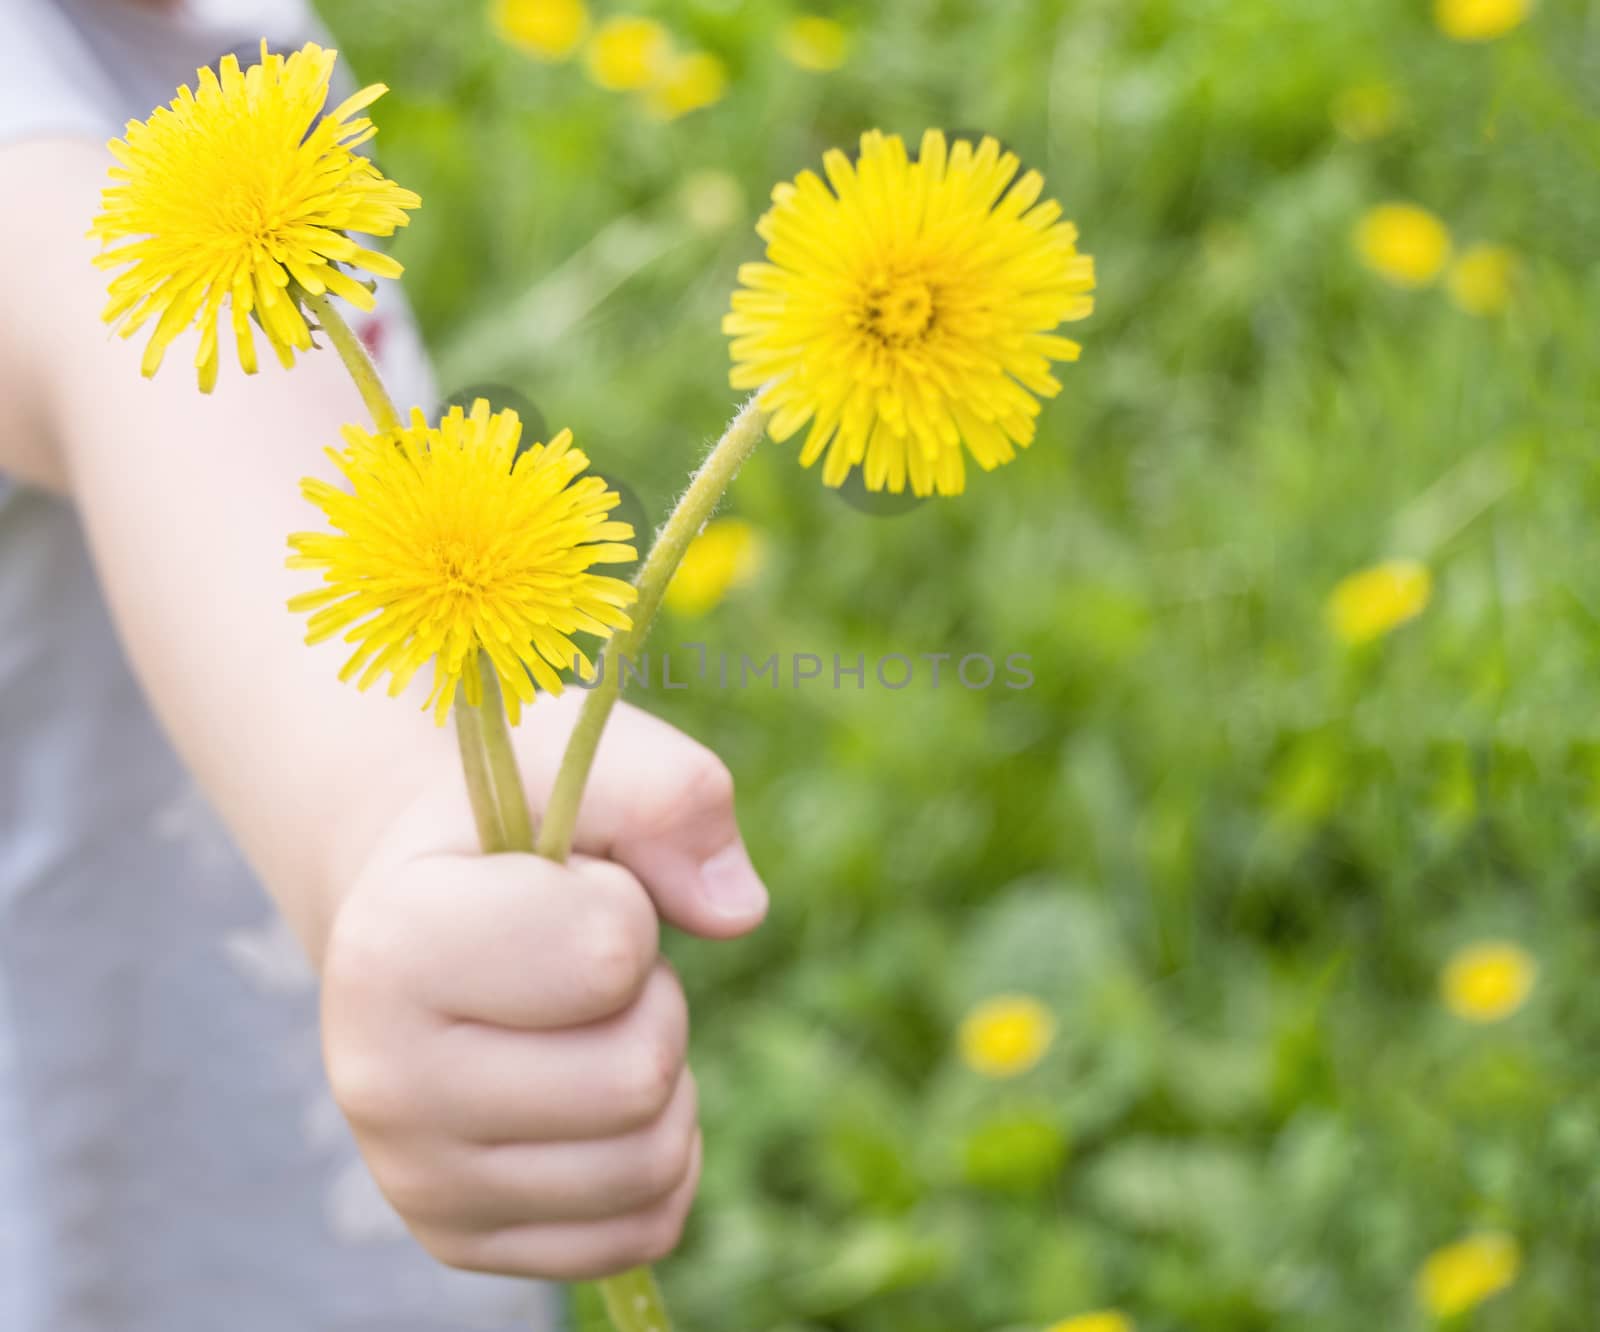 The concept of a happy childhood, yellow dandelions in the hand of a child on a blurred background of nature, in the open by claire_lucia